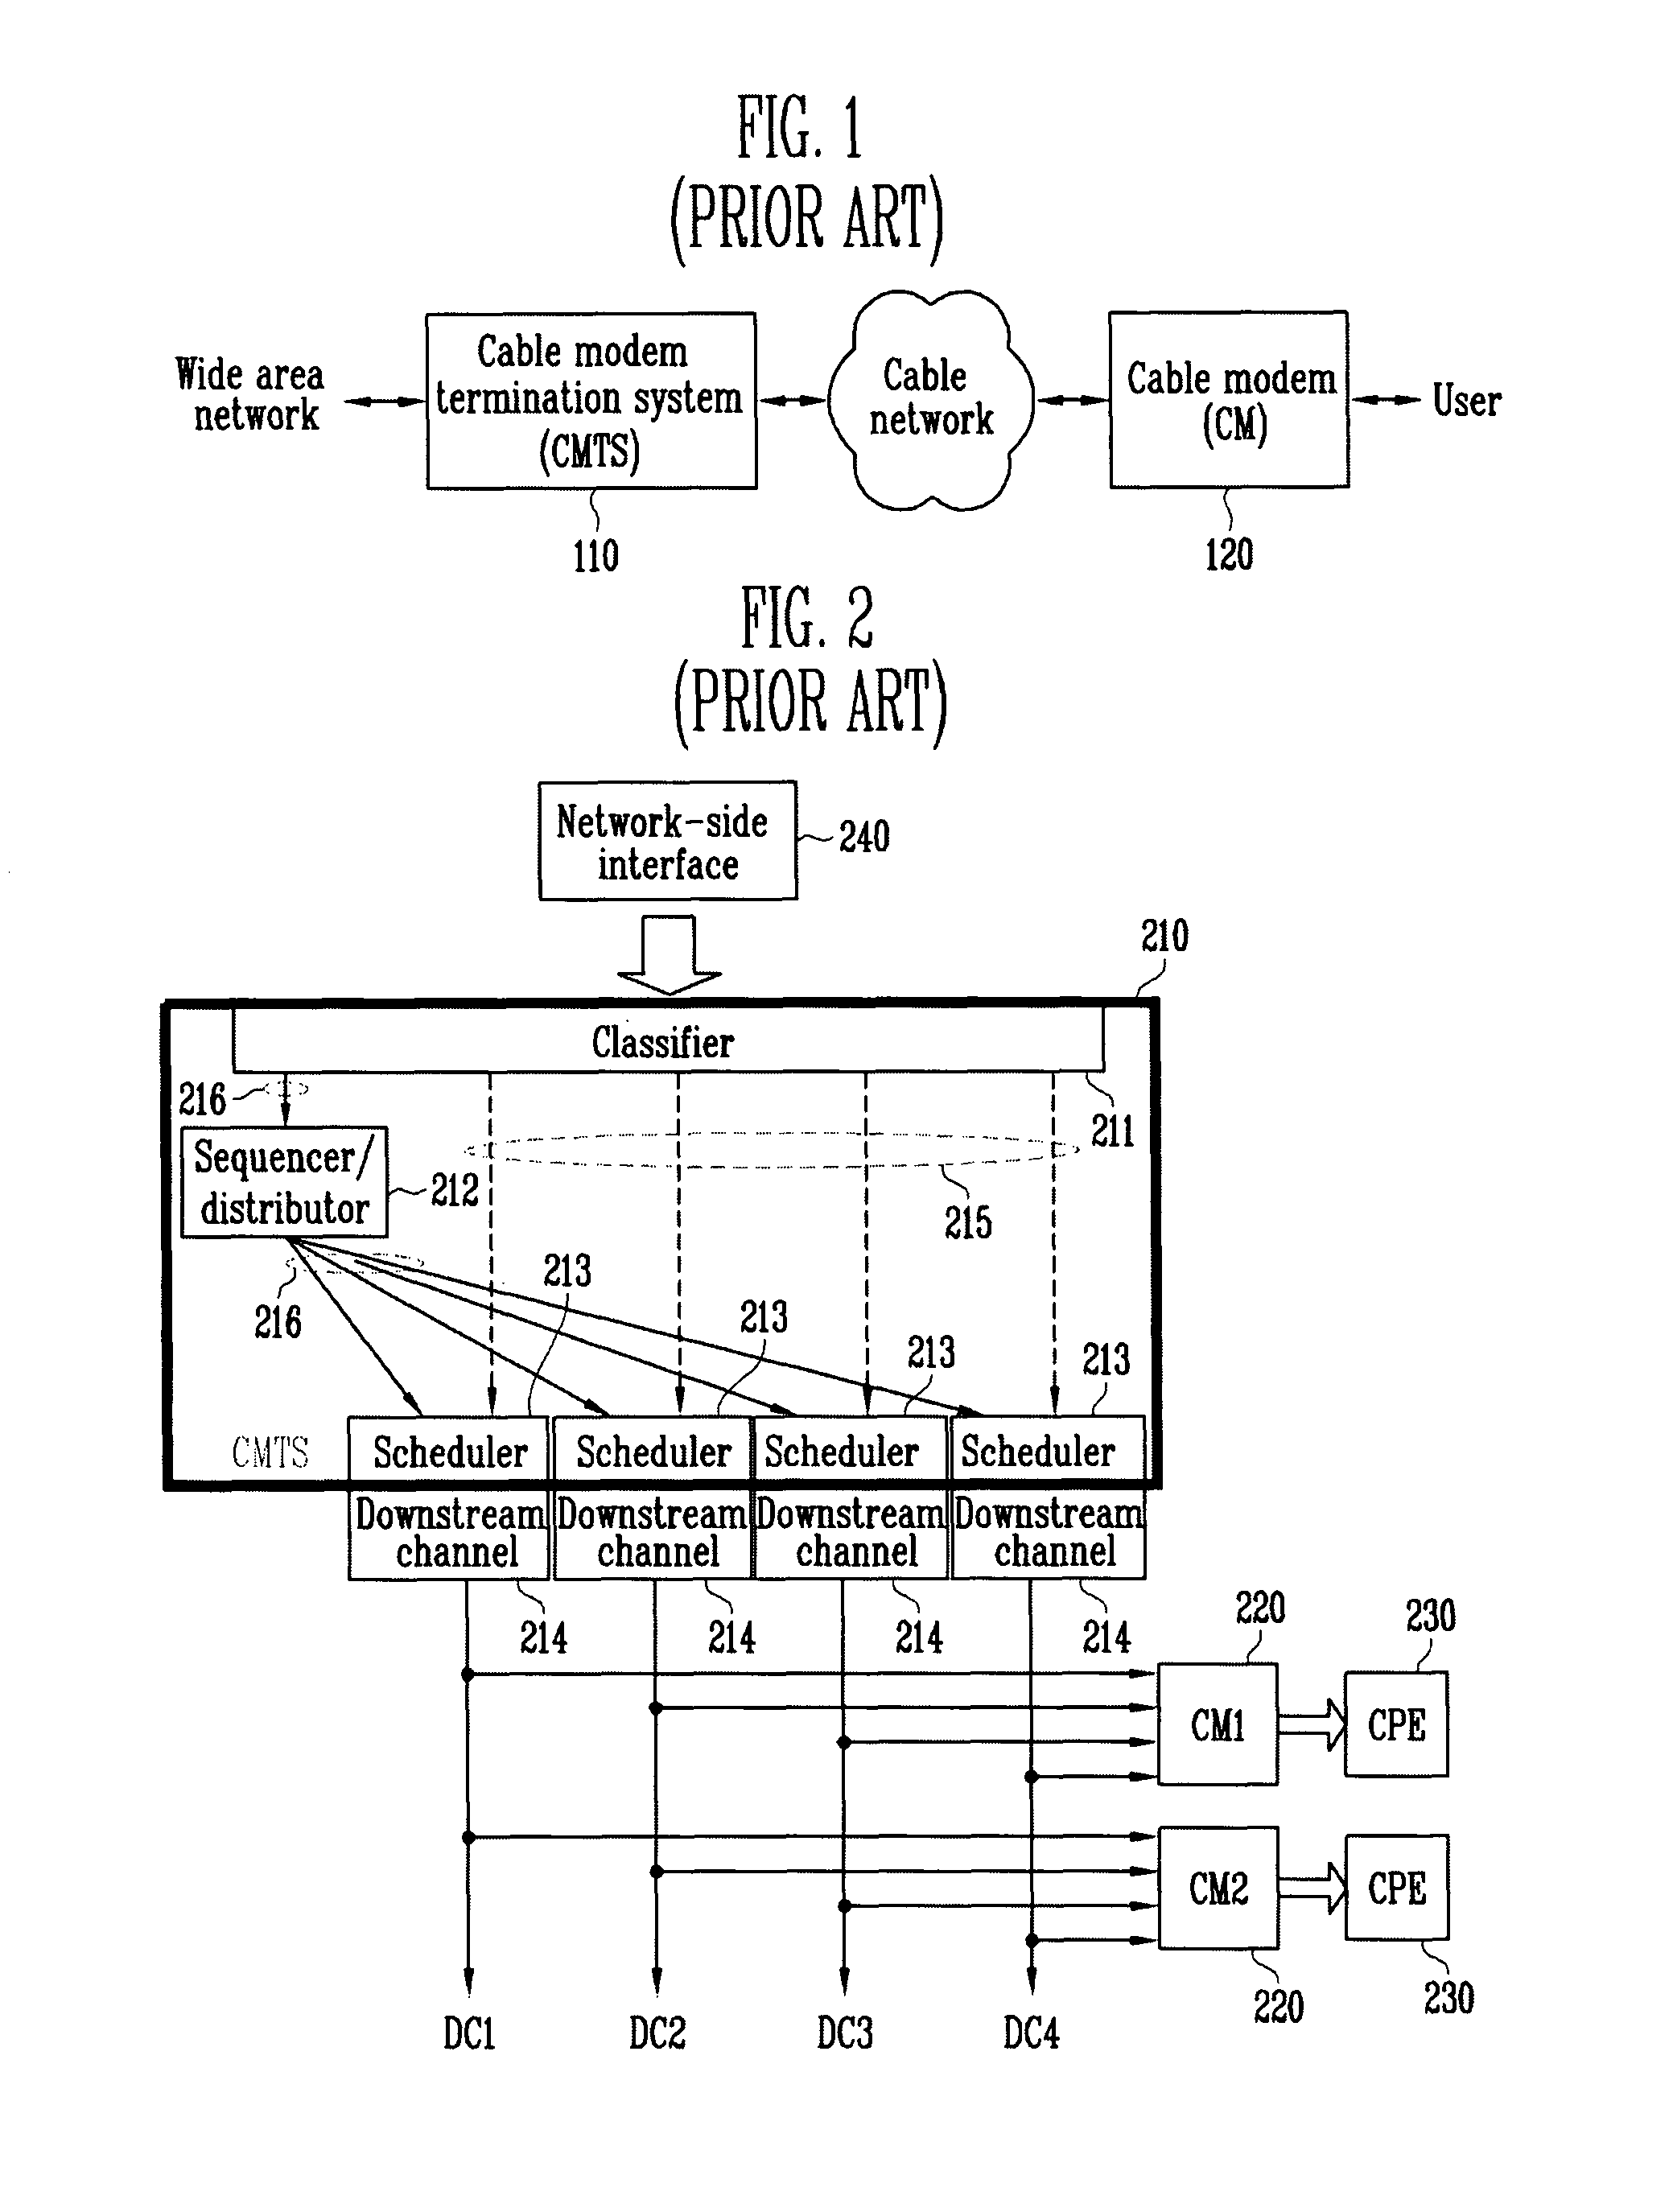 Method for reporting downstream packet resequencing status in cable modem